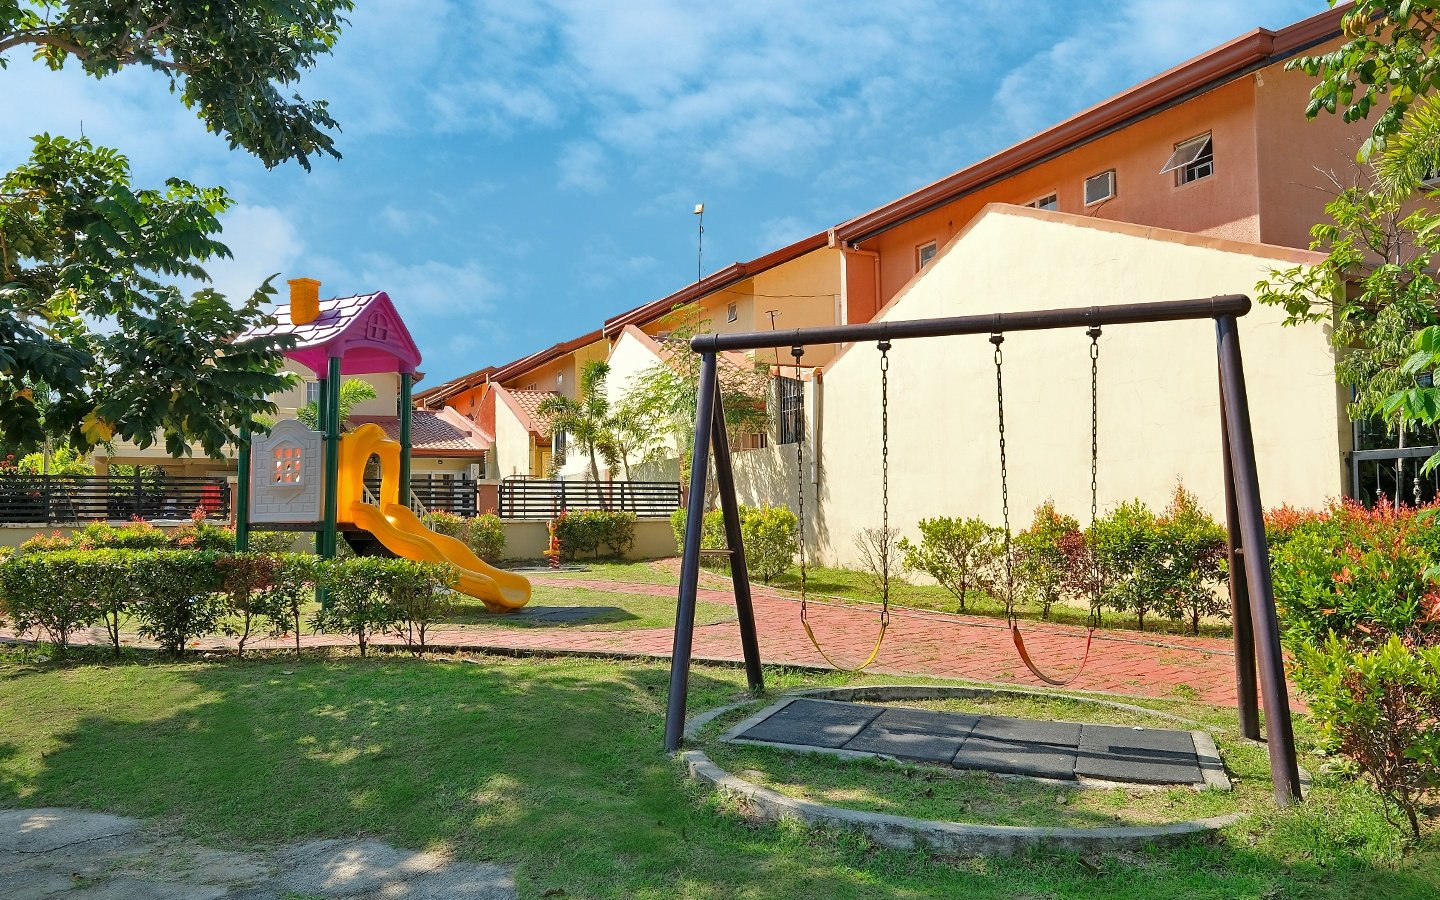 Camella Bataan playground with swings and slide